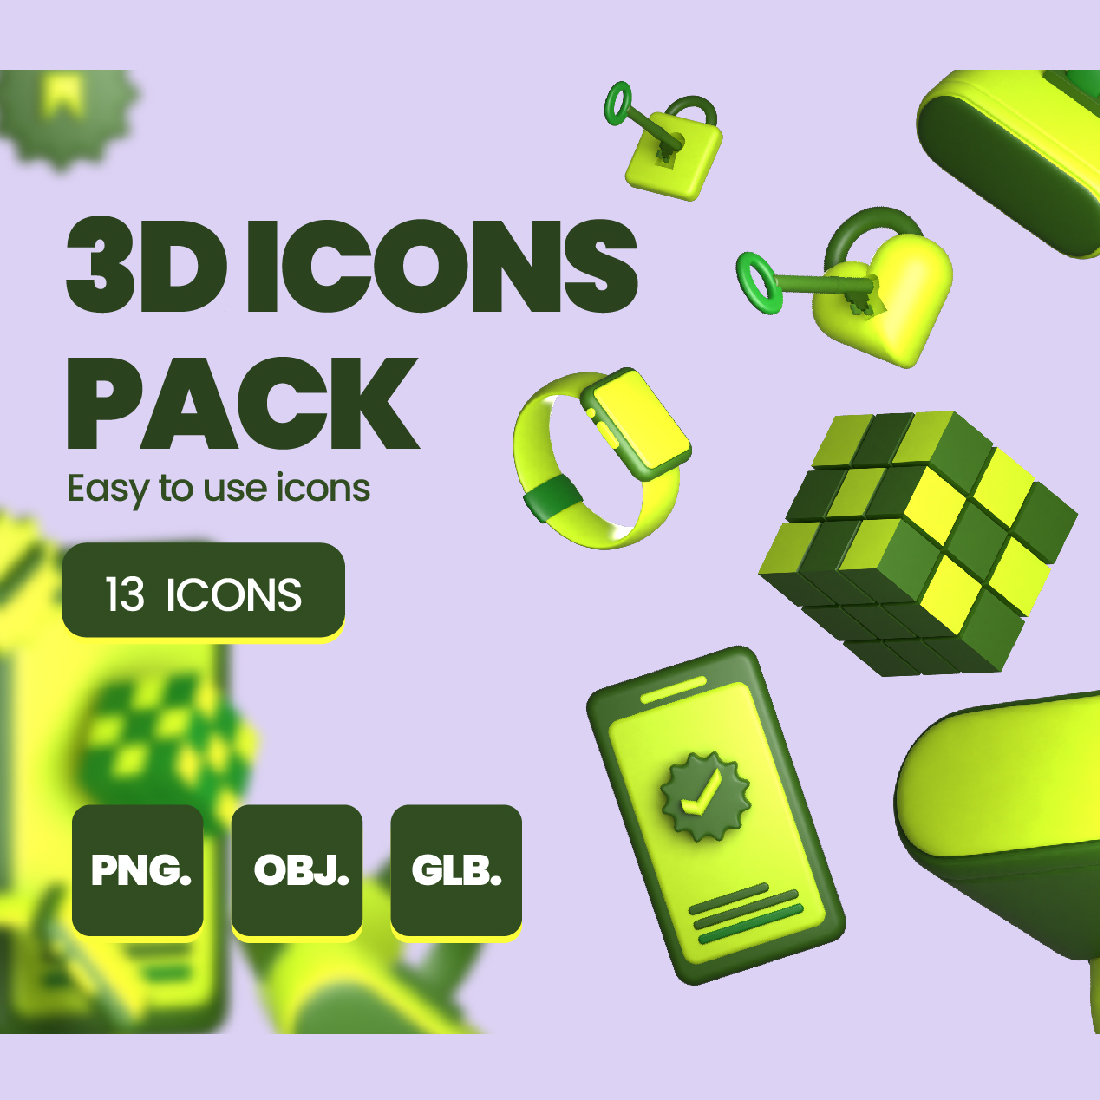 3d icon pack cover image.